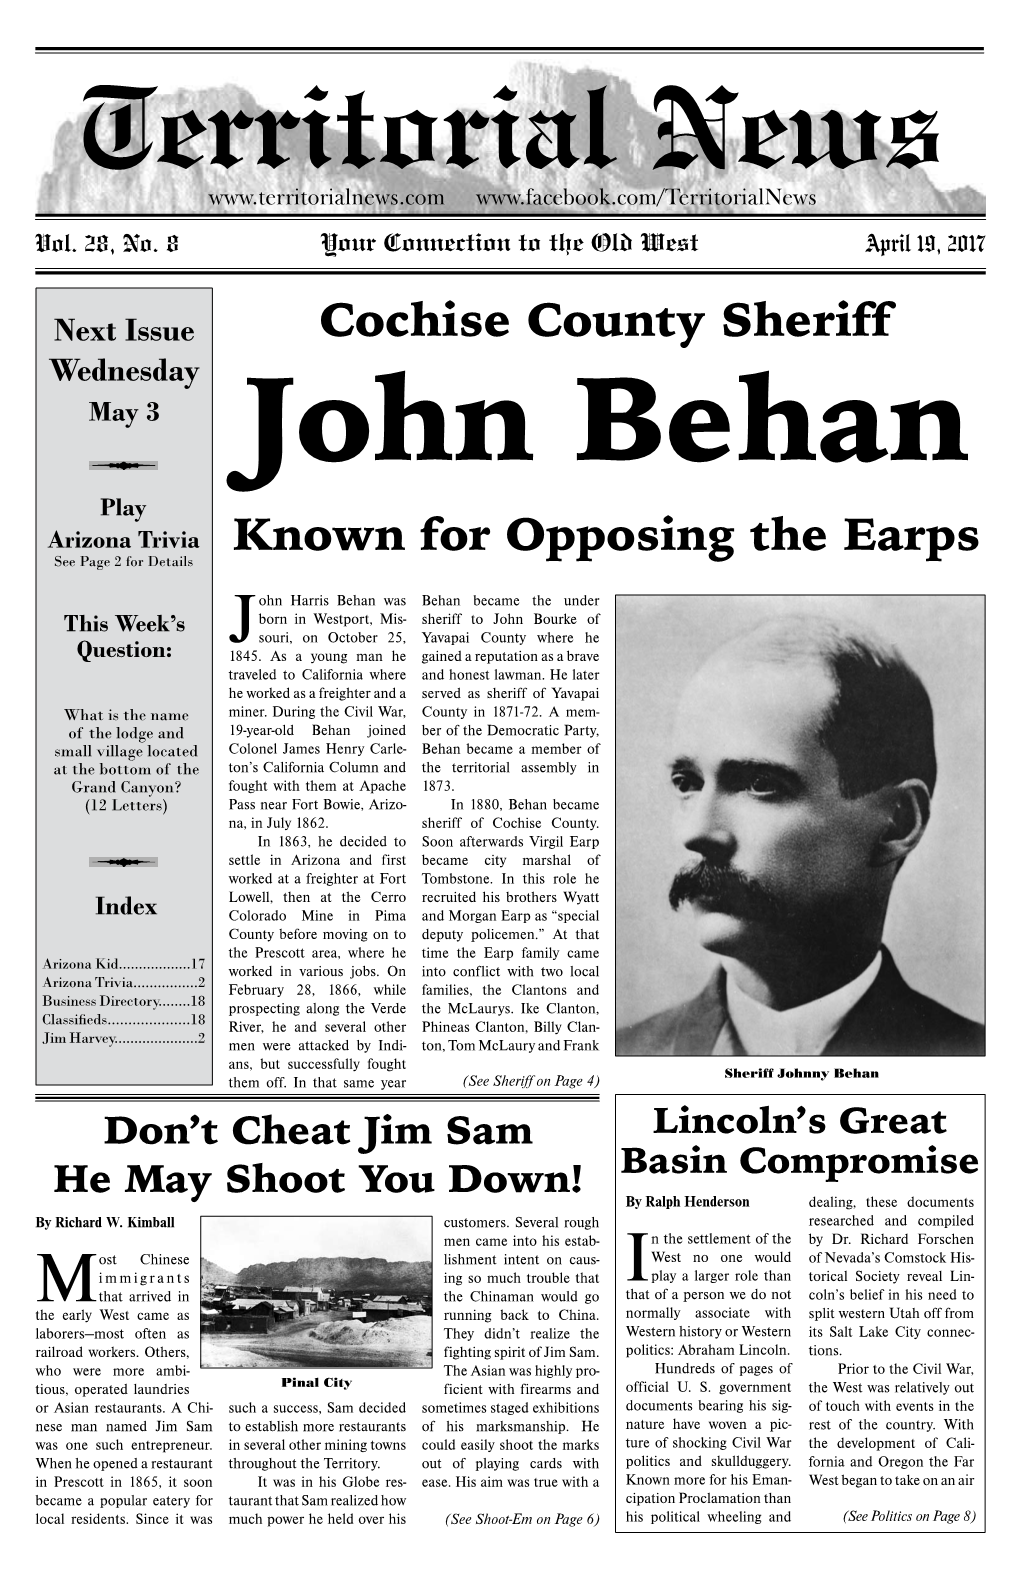 Cochise County Sheriff Wednesday May 3 John Behan Play Arizona Trivia Known for Opposing the Earps See Page 2 for Details